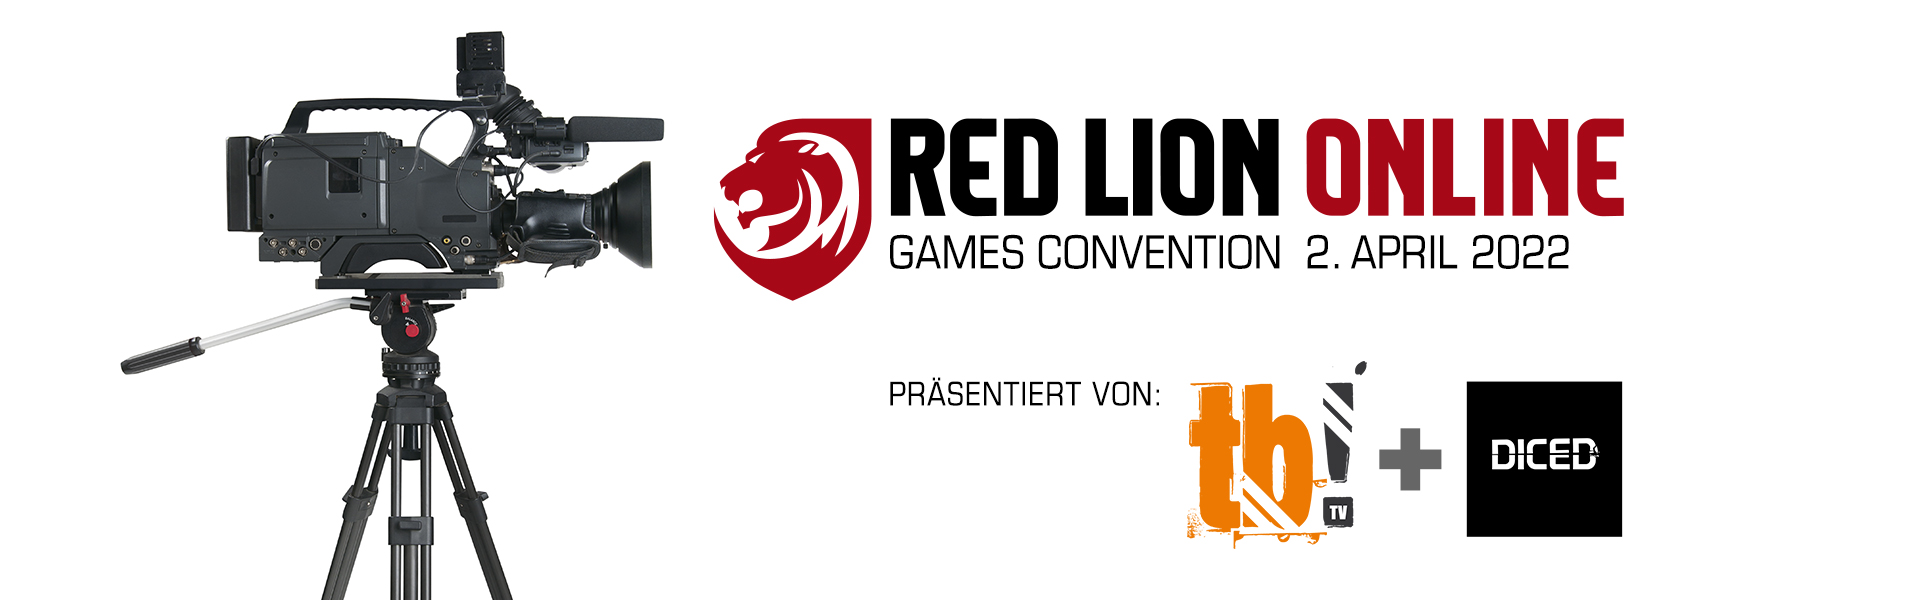 RED LION GAMES CONVENTION ONLINE